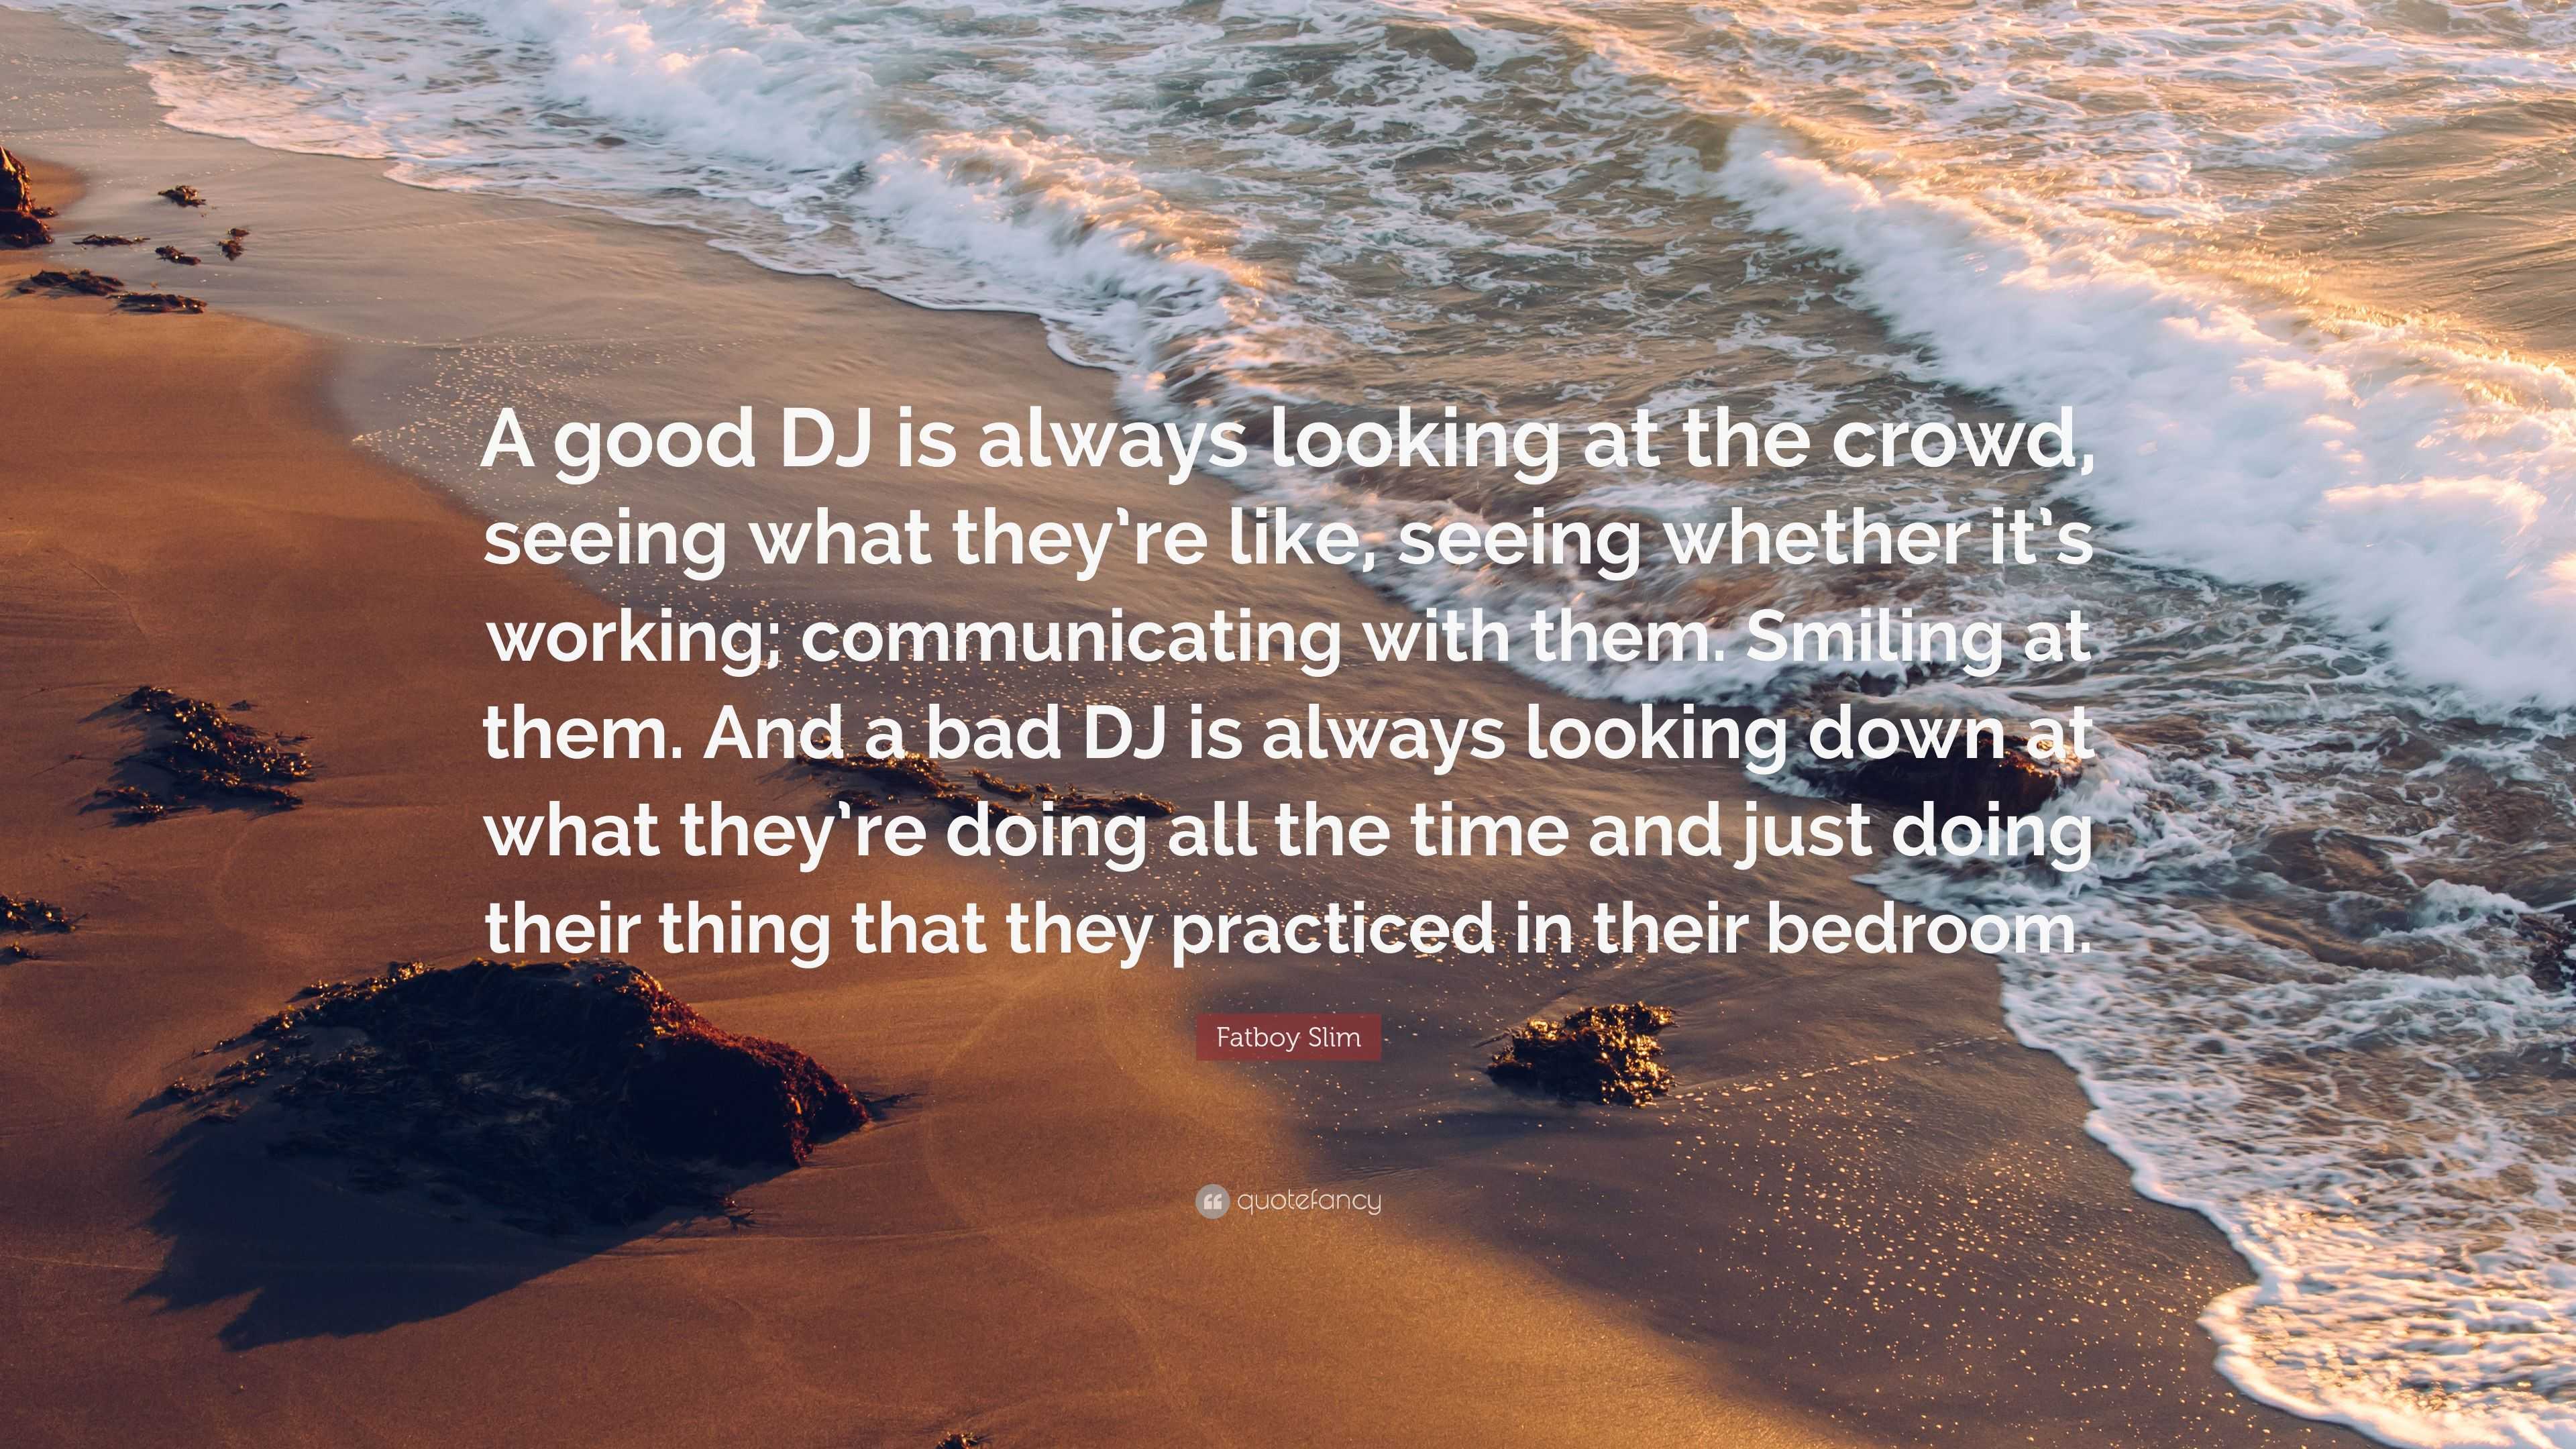 Fatboy Slim Quote: “A good DJ is always looking at the crowd, seeing